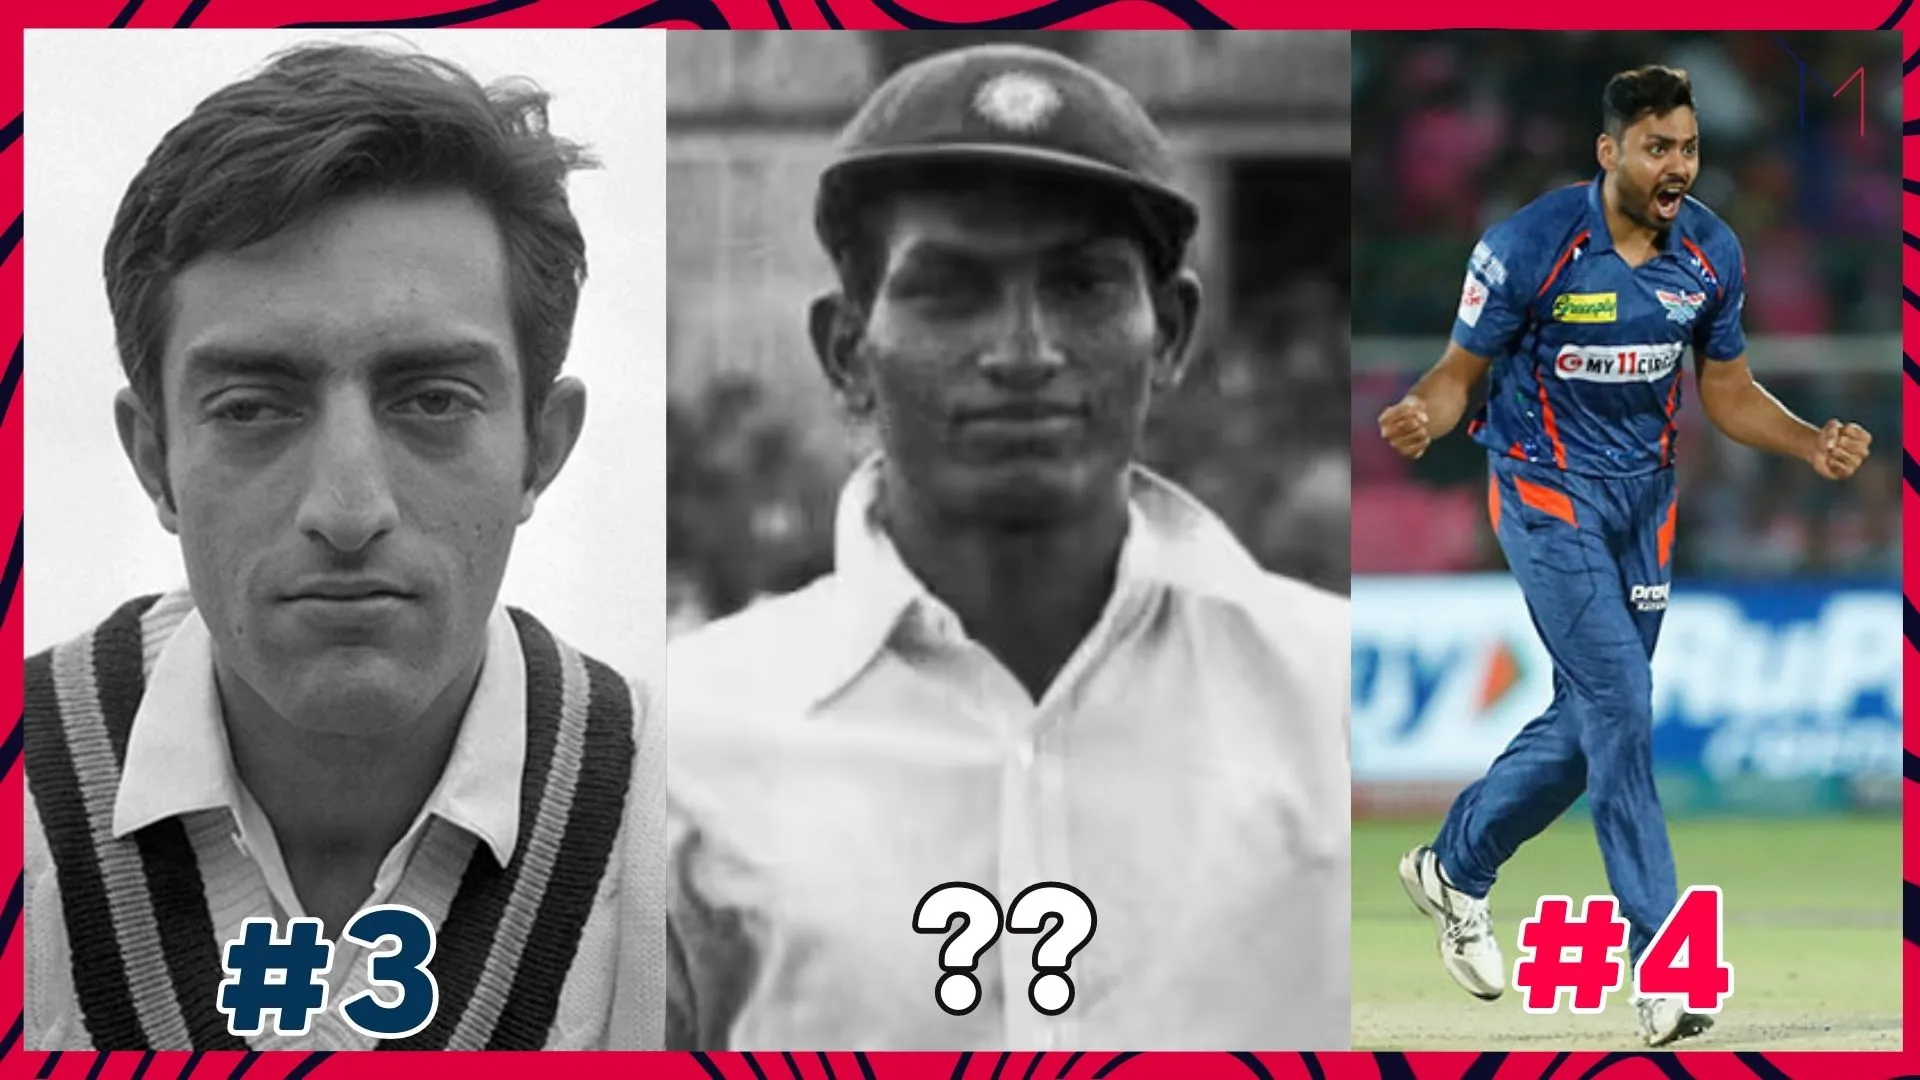 Top 7 most popular cricketers from Madhya Pradesh - Famous cricket players from Madhya Pradesh